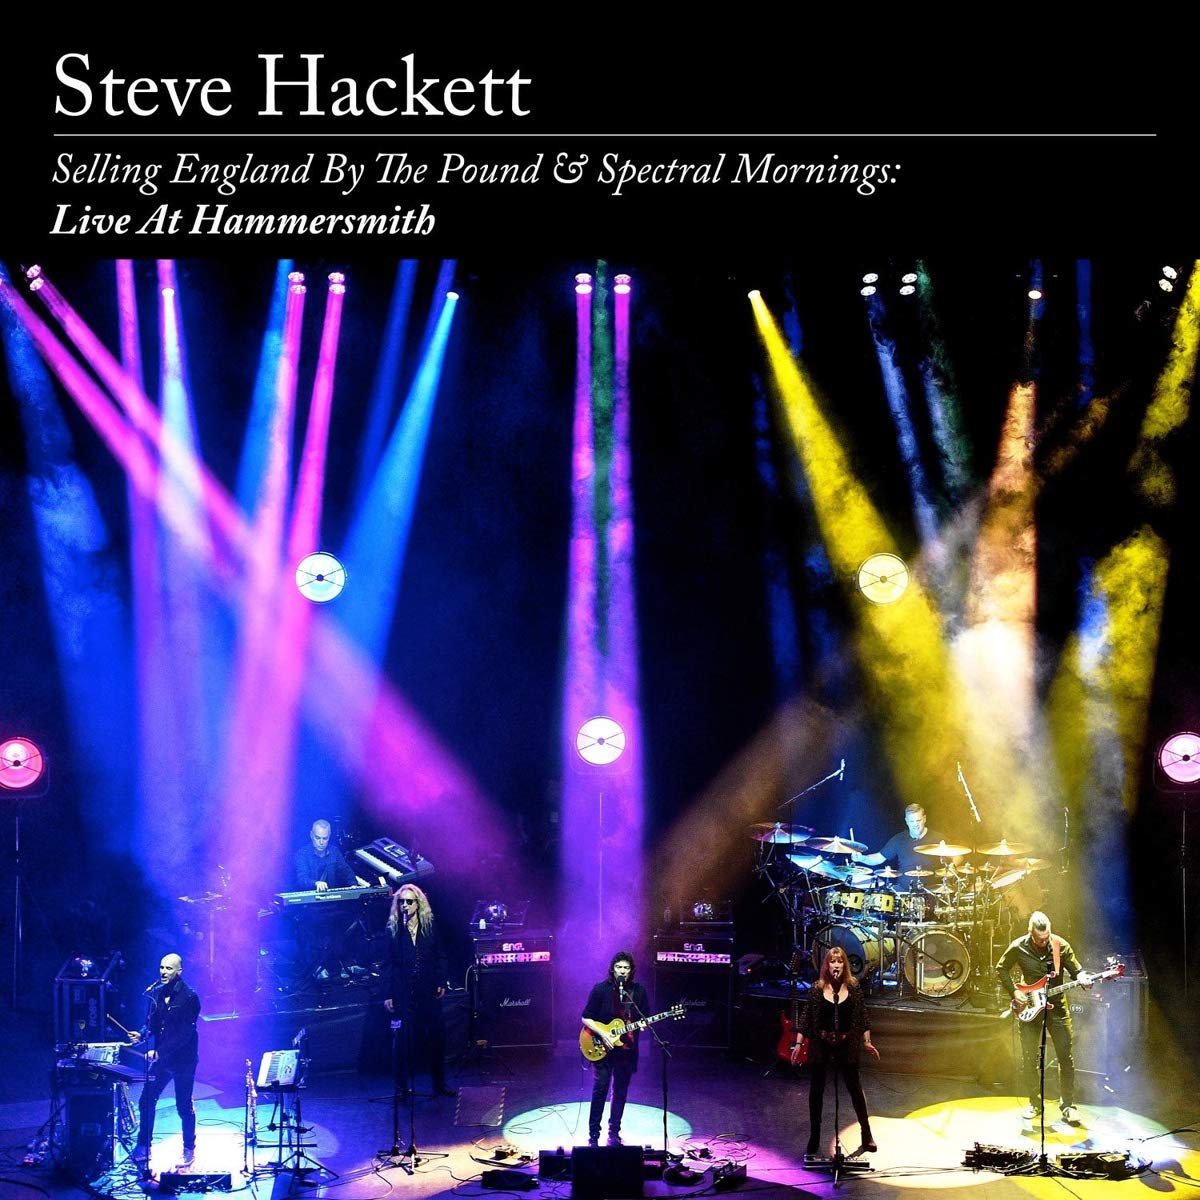 Steve Hackett > Selling England By The Pound & Spectral Mornings: Live At Hammersmith